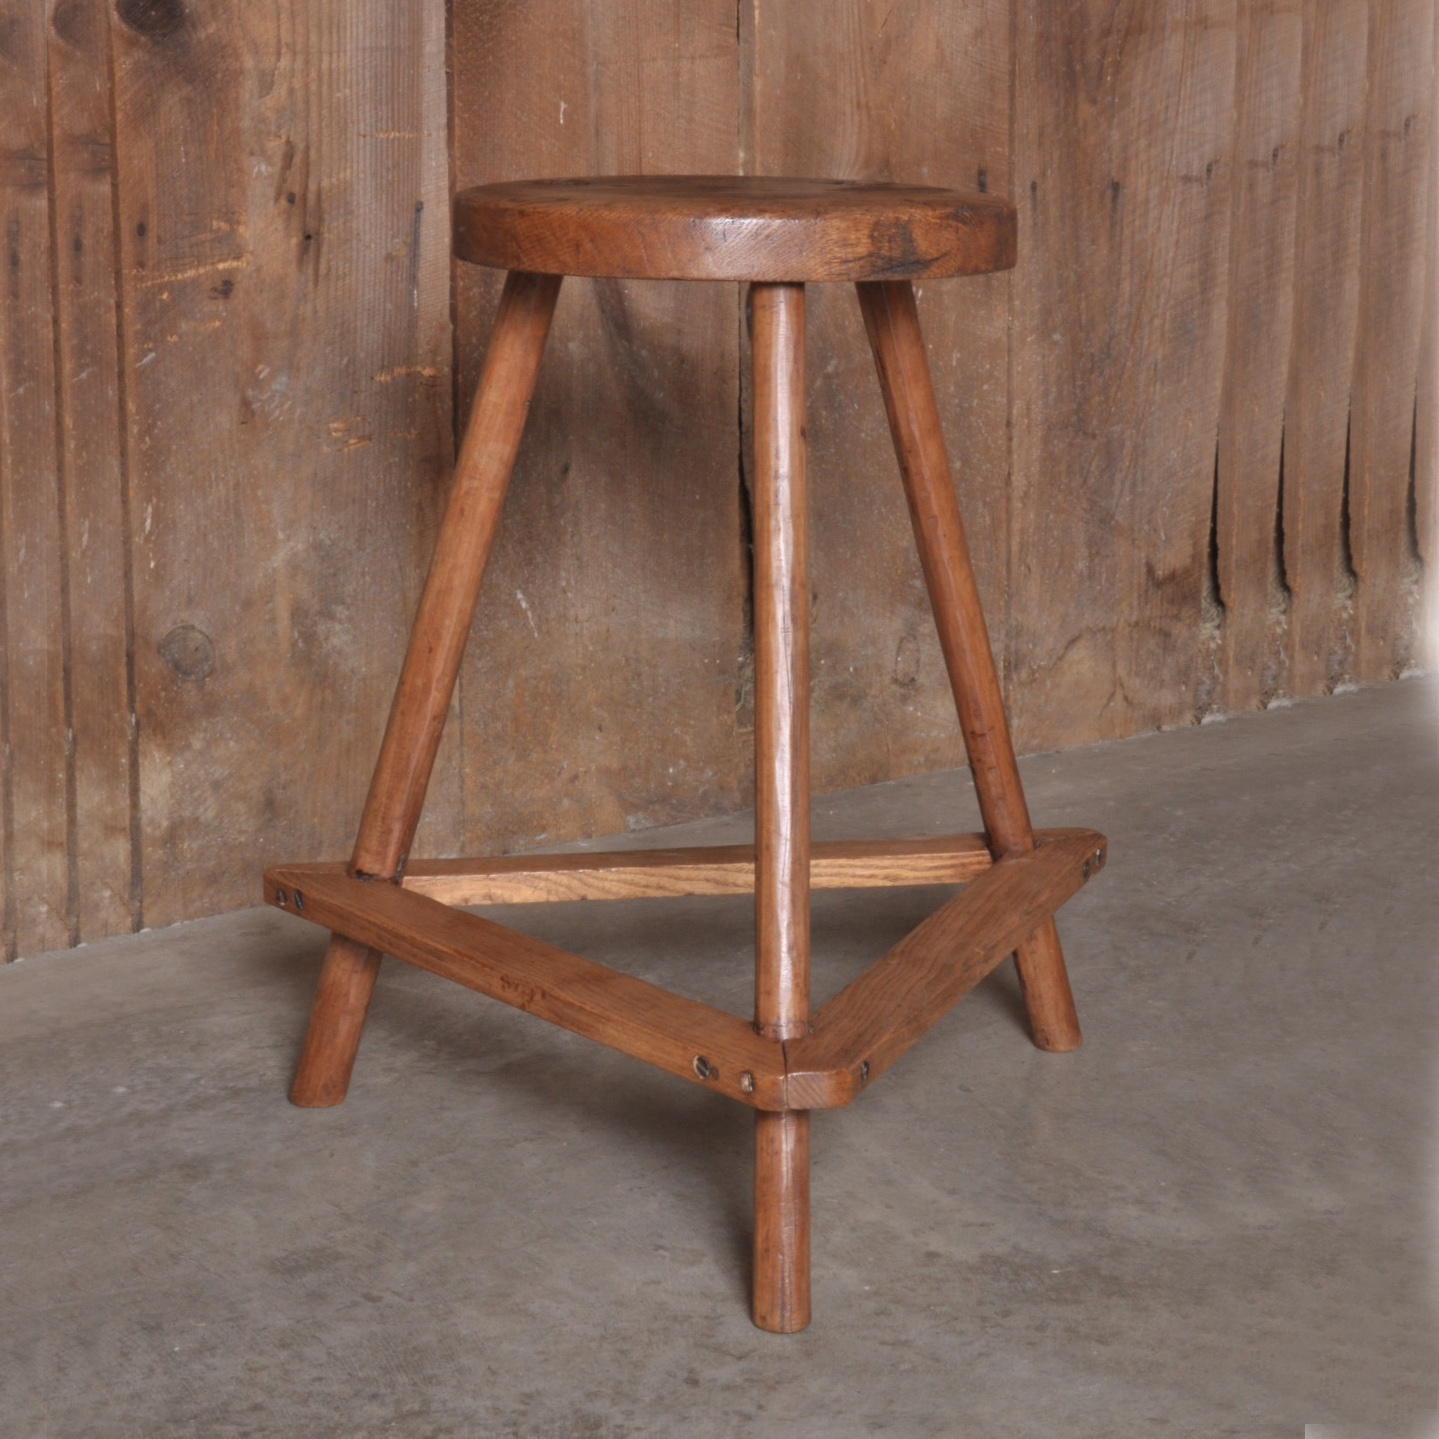 Wooden High Stool Image